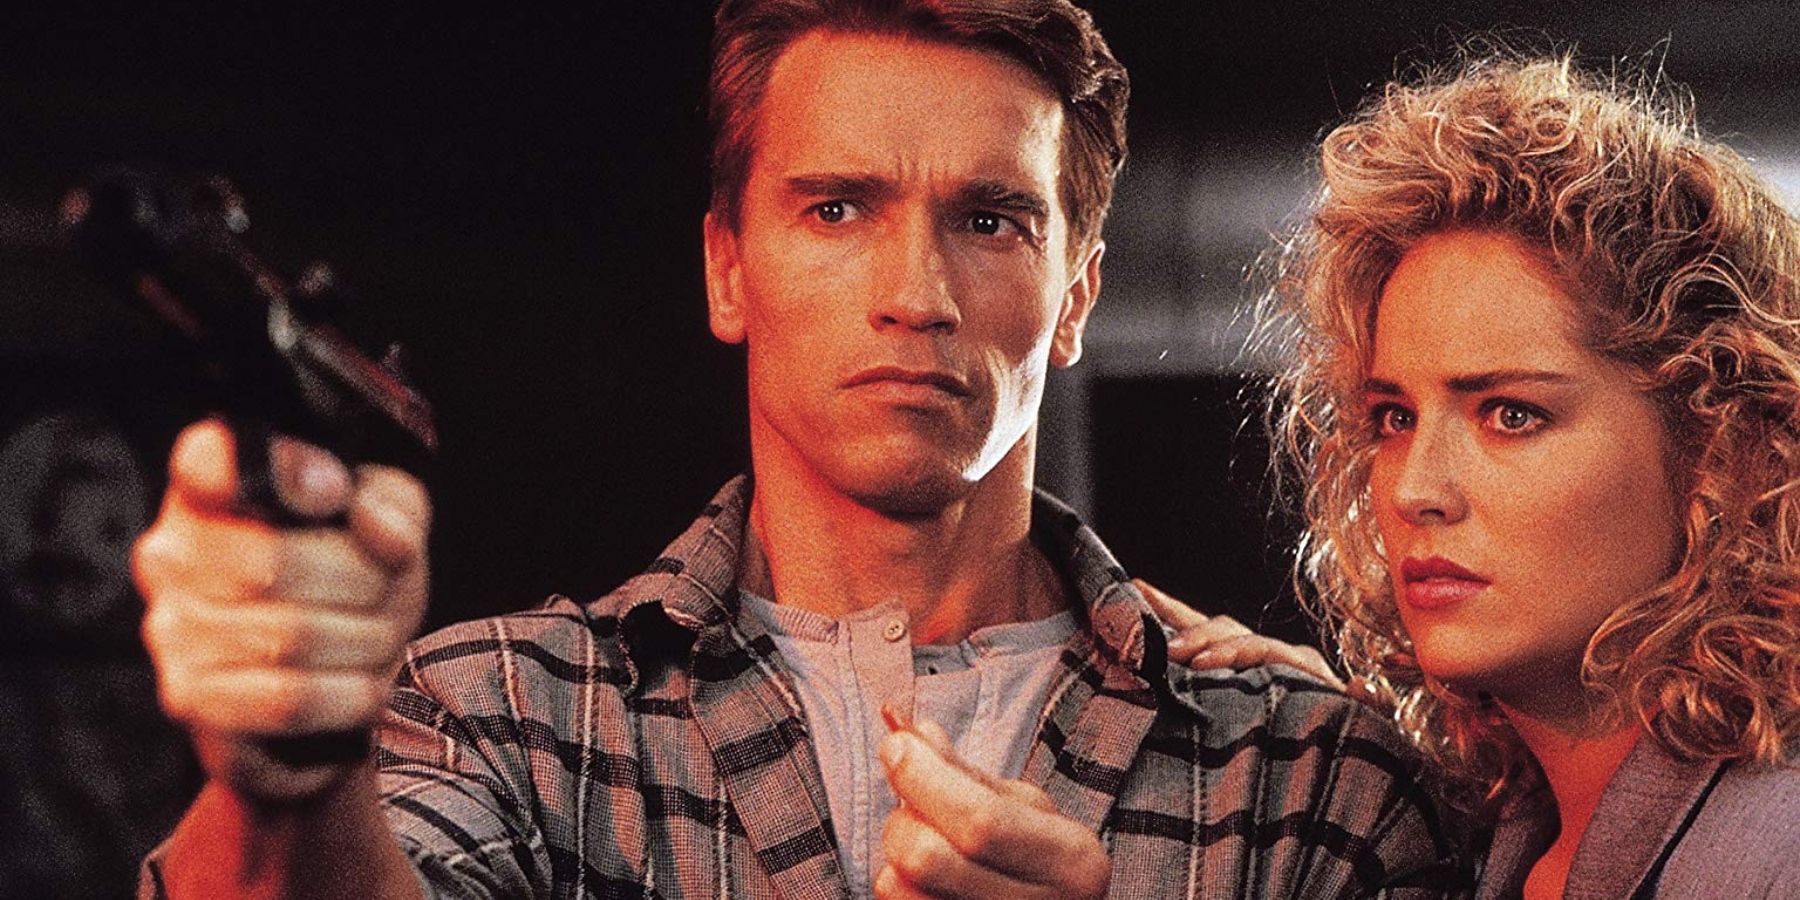 Arnold-Schwarzenegger-and-Sharon-Stone-in-Total-Recall-1990-Film